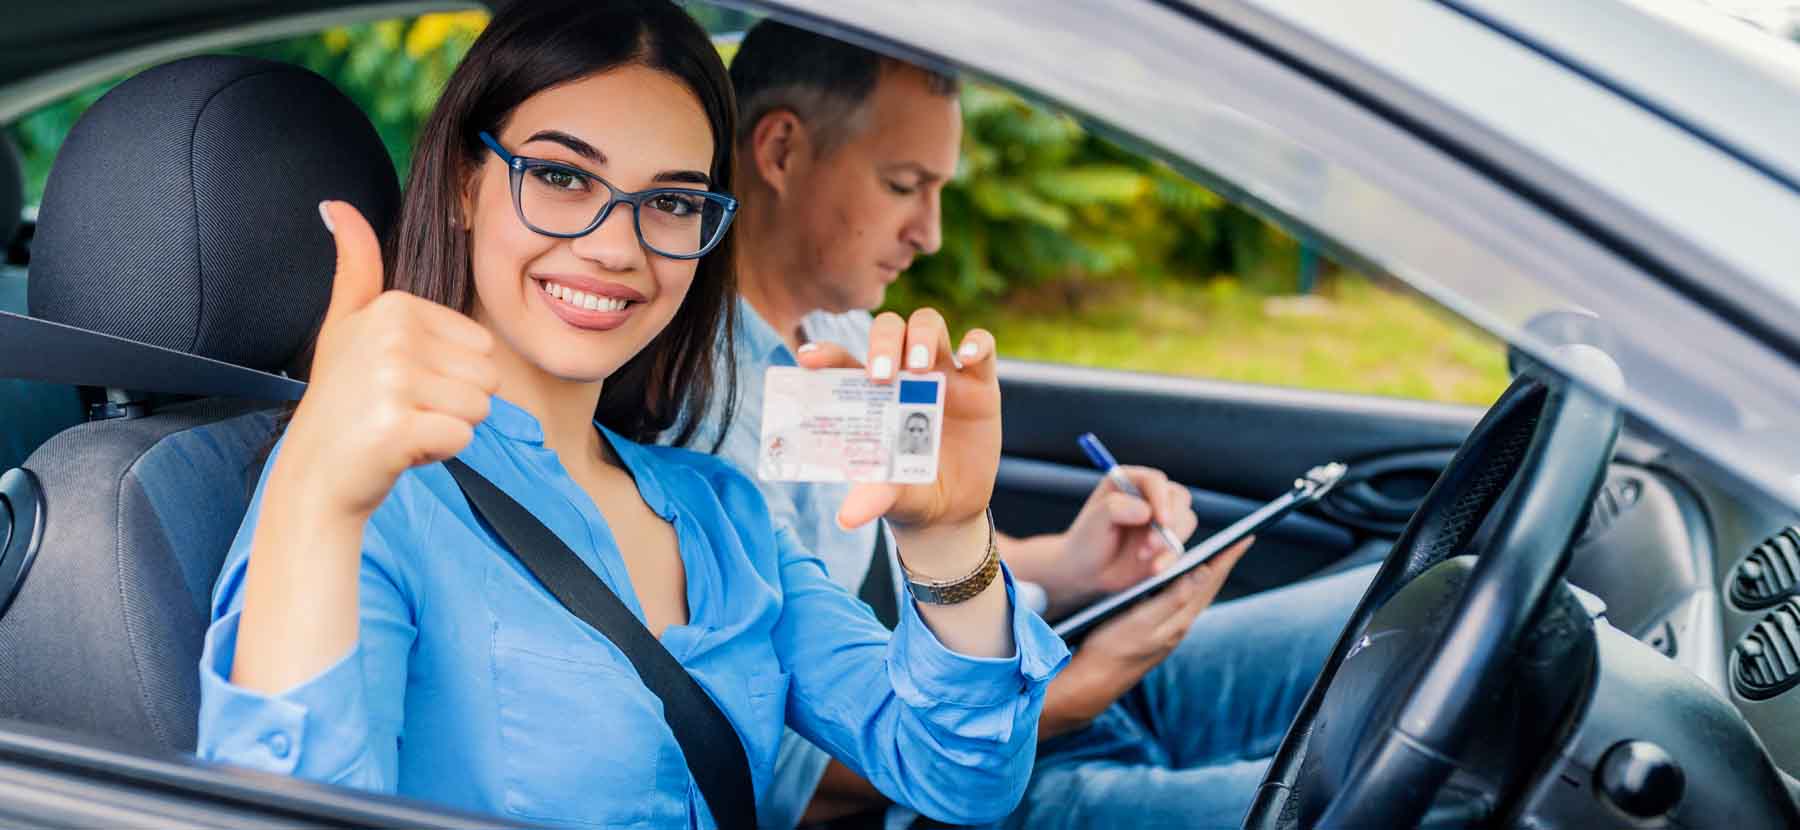 student showing driving license sitting besides her instructor in driving school Irving